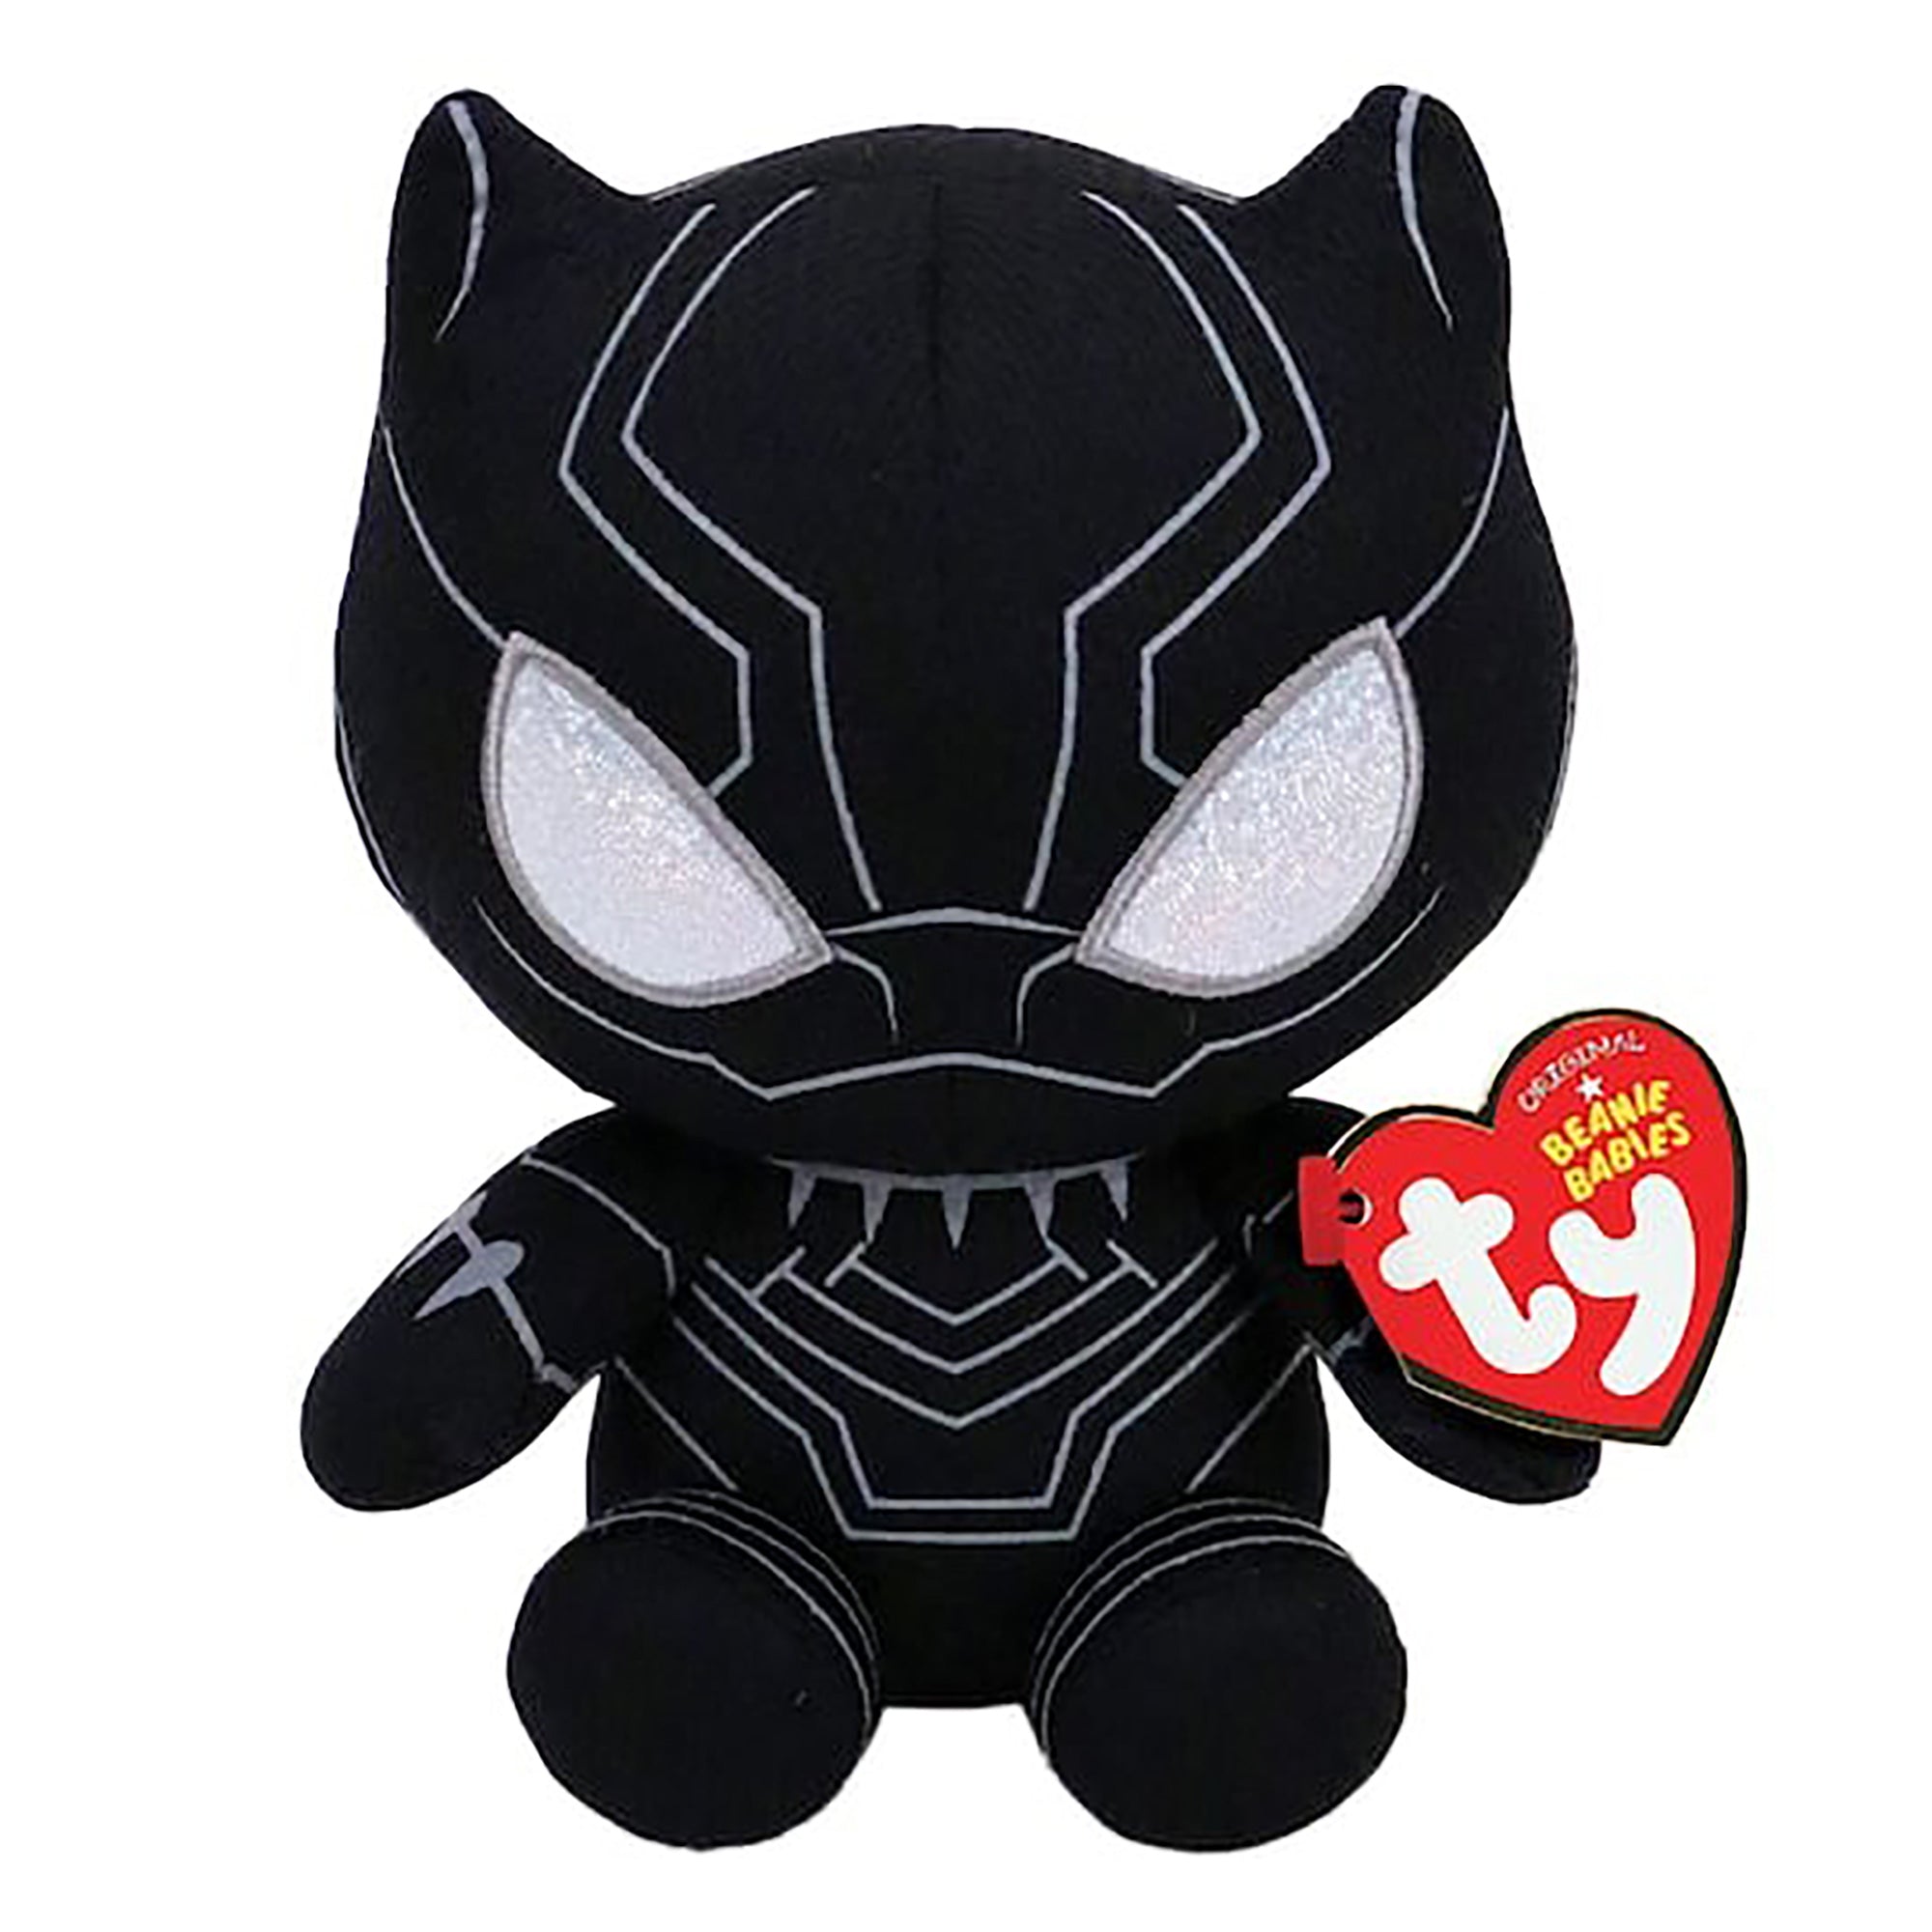 TY Marvel Soft Plush, Black Panther, 8 Inches, 1 Count